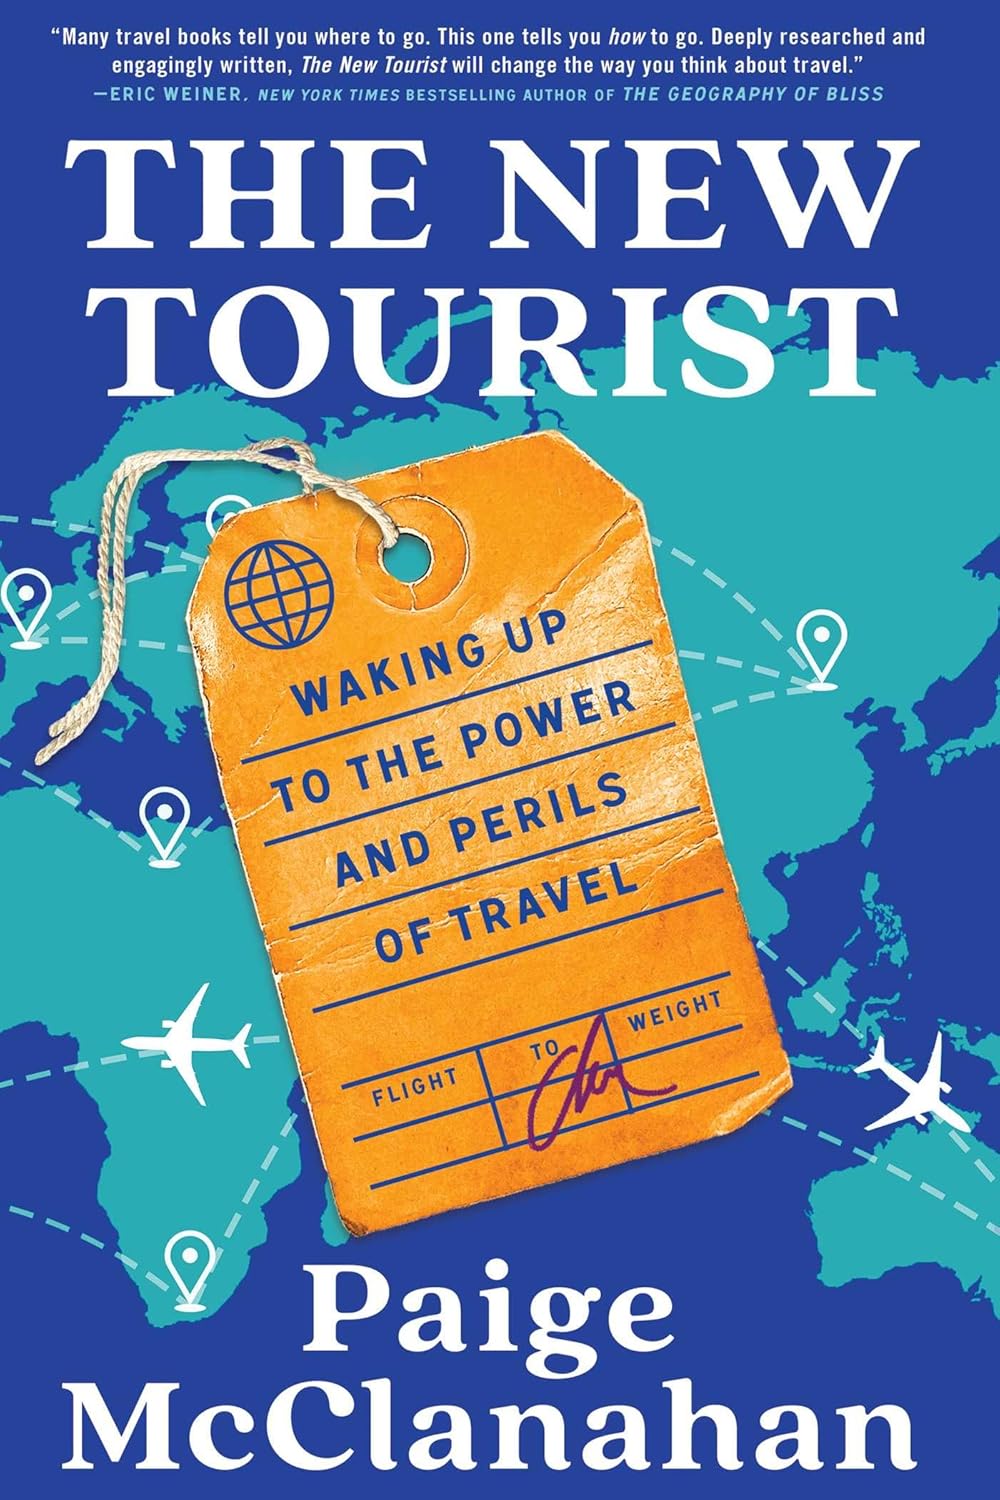 THE NEW TOURIST: WAKING UP TO THE POWER AND PERILS OF TRAVEL